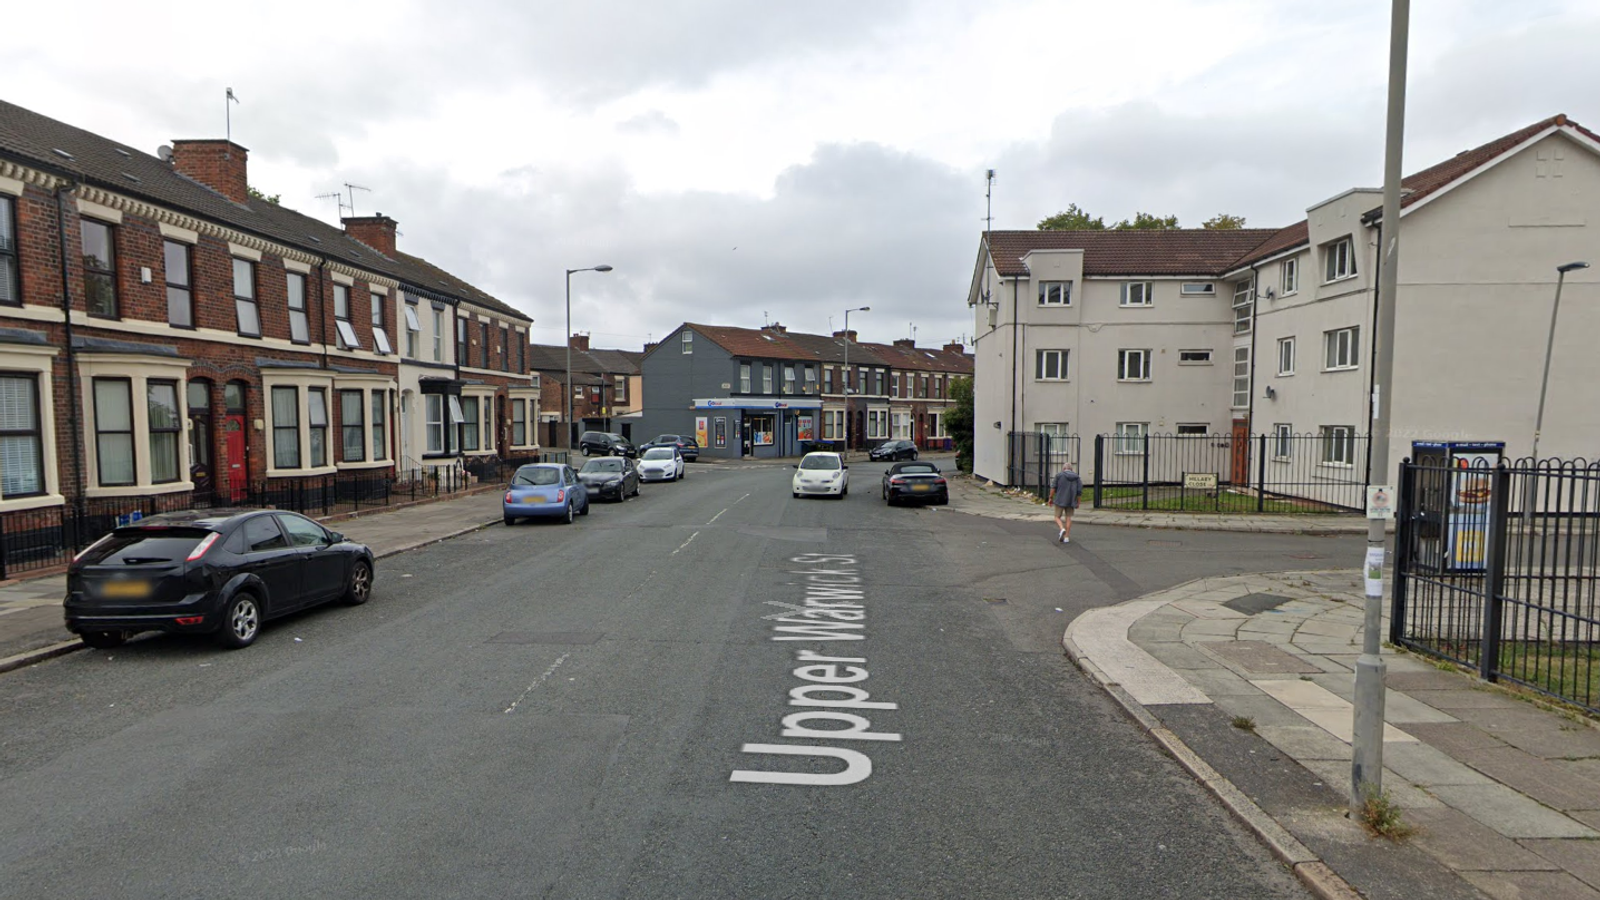 Three people stabbed and slashed in 'shocking' attack in Liverpool